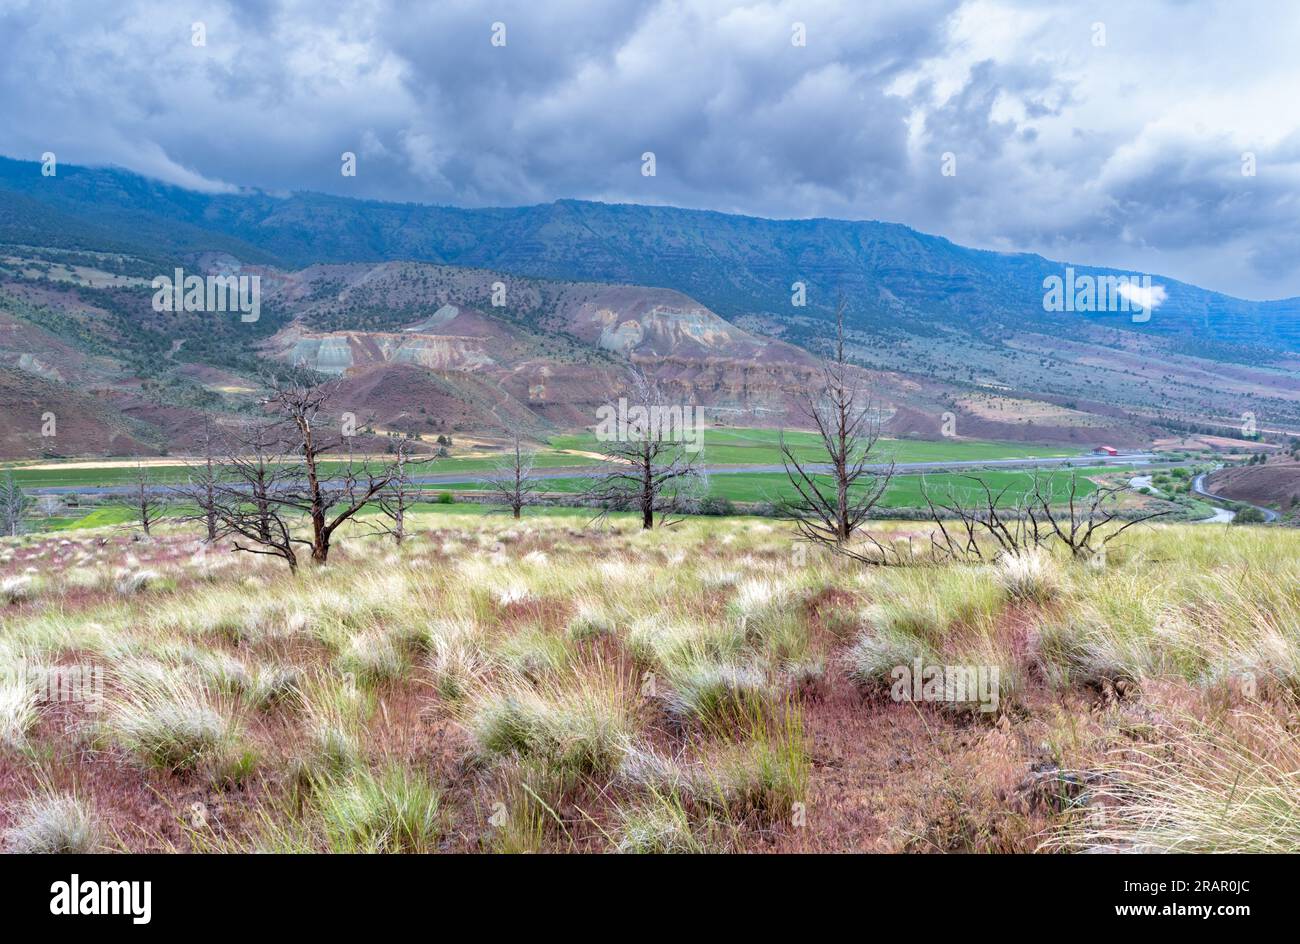 Lush valley in the distance with sagebrush in the foreground and mountains in the distance. Stock Photo